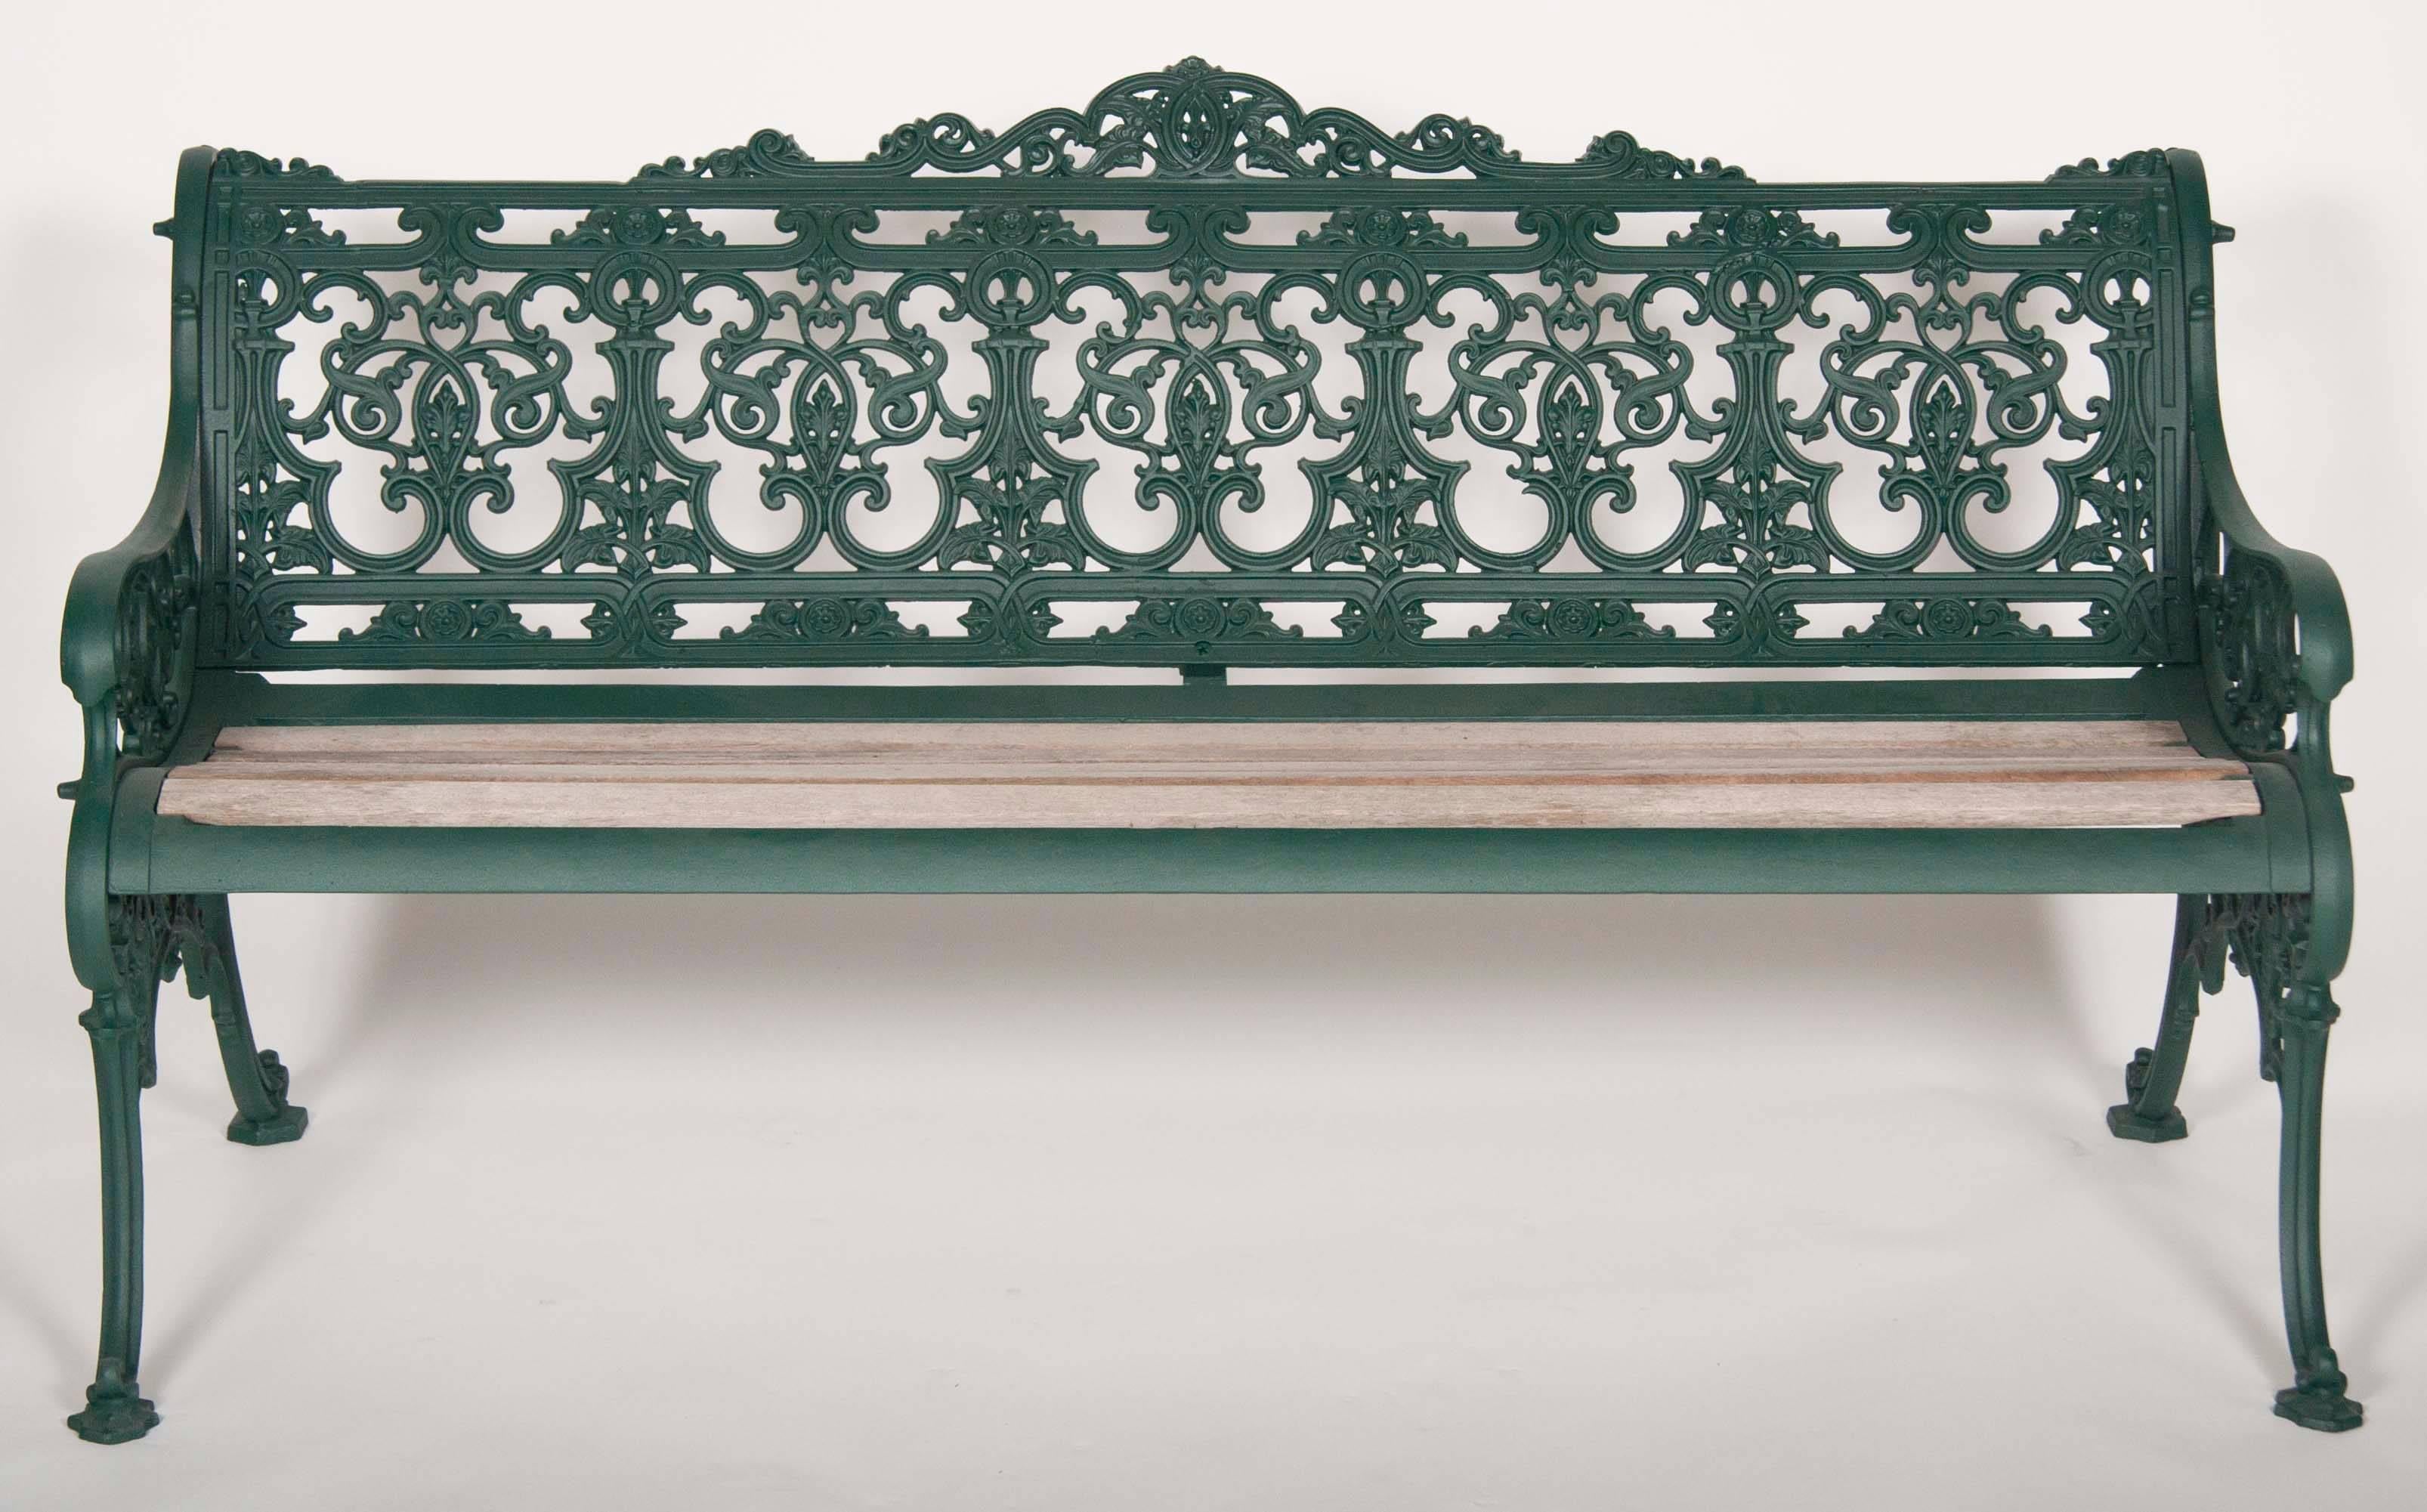 A signed and dated English cast iron bench by Andrew McLaren & Co in powder coated finish.